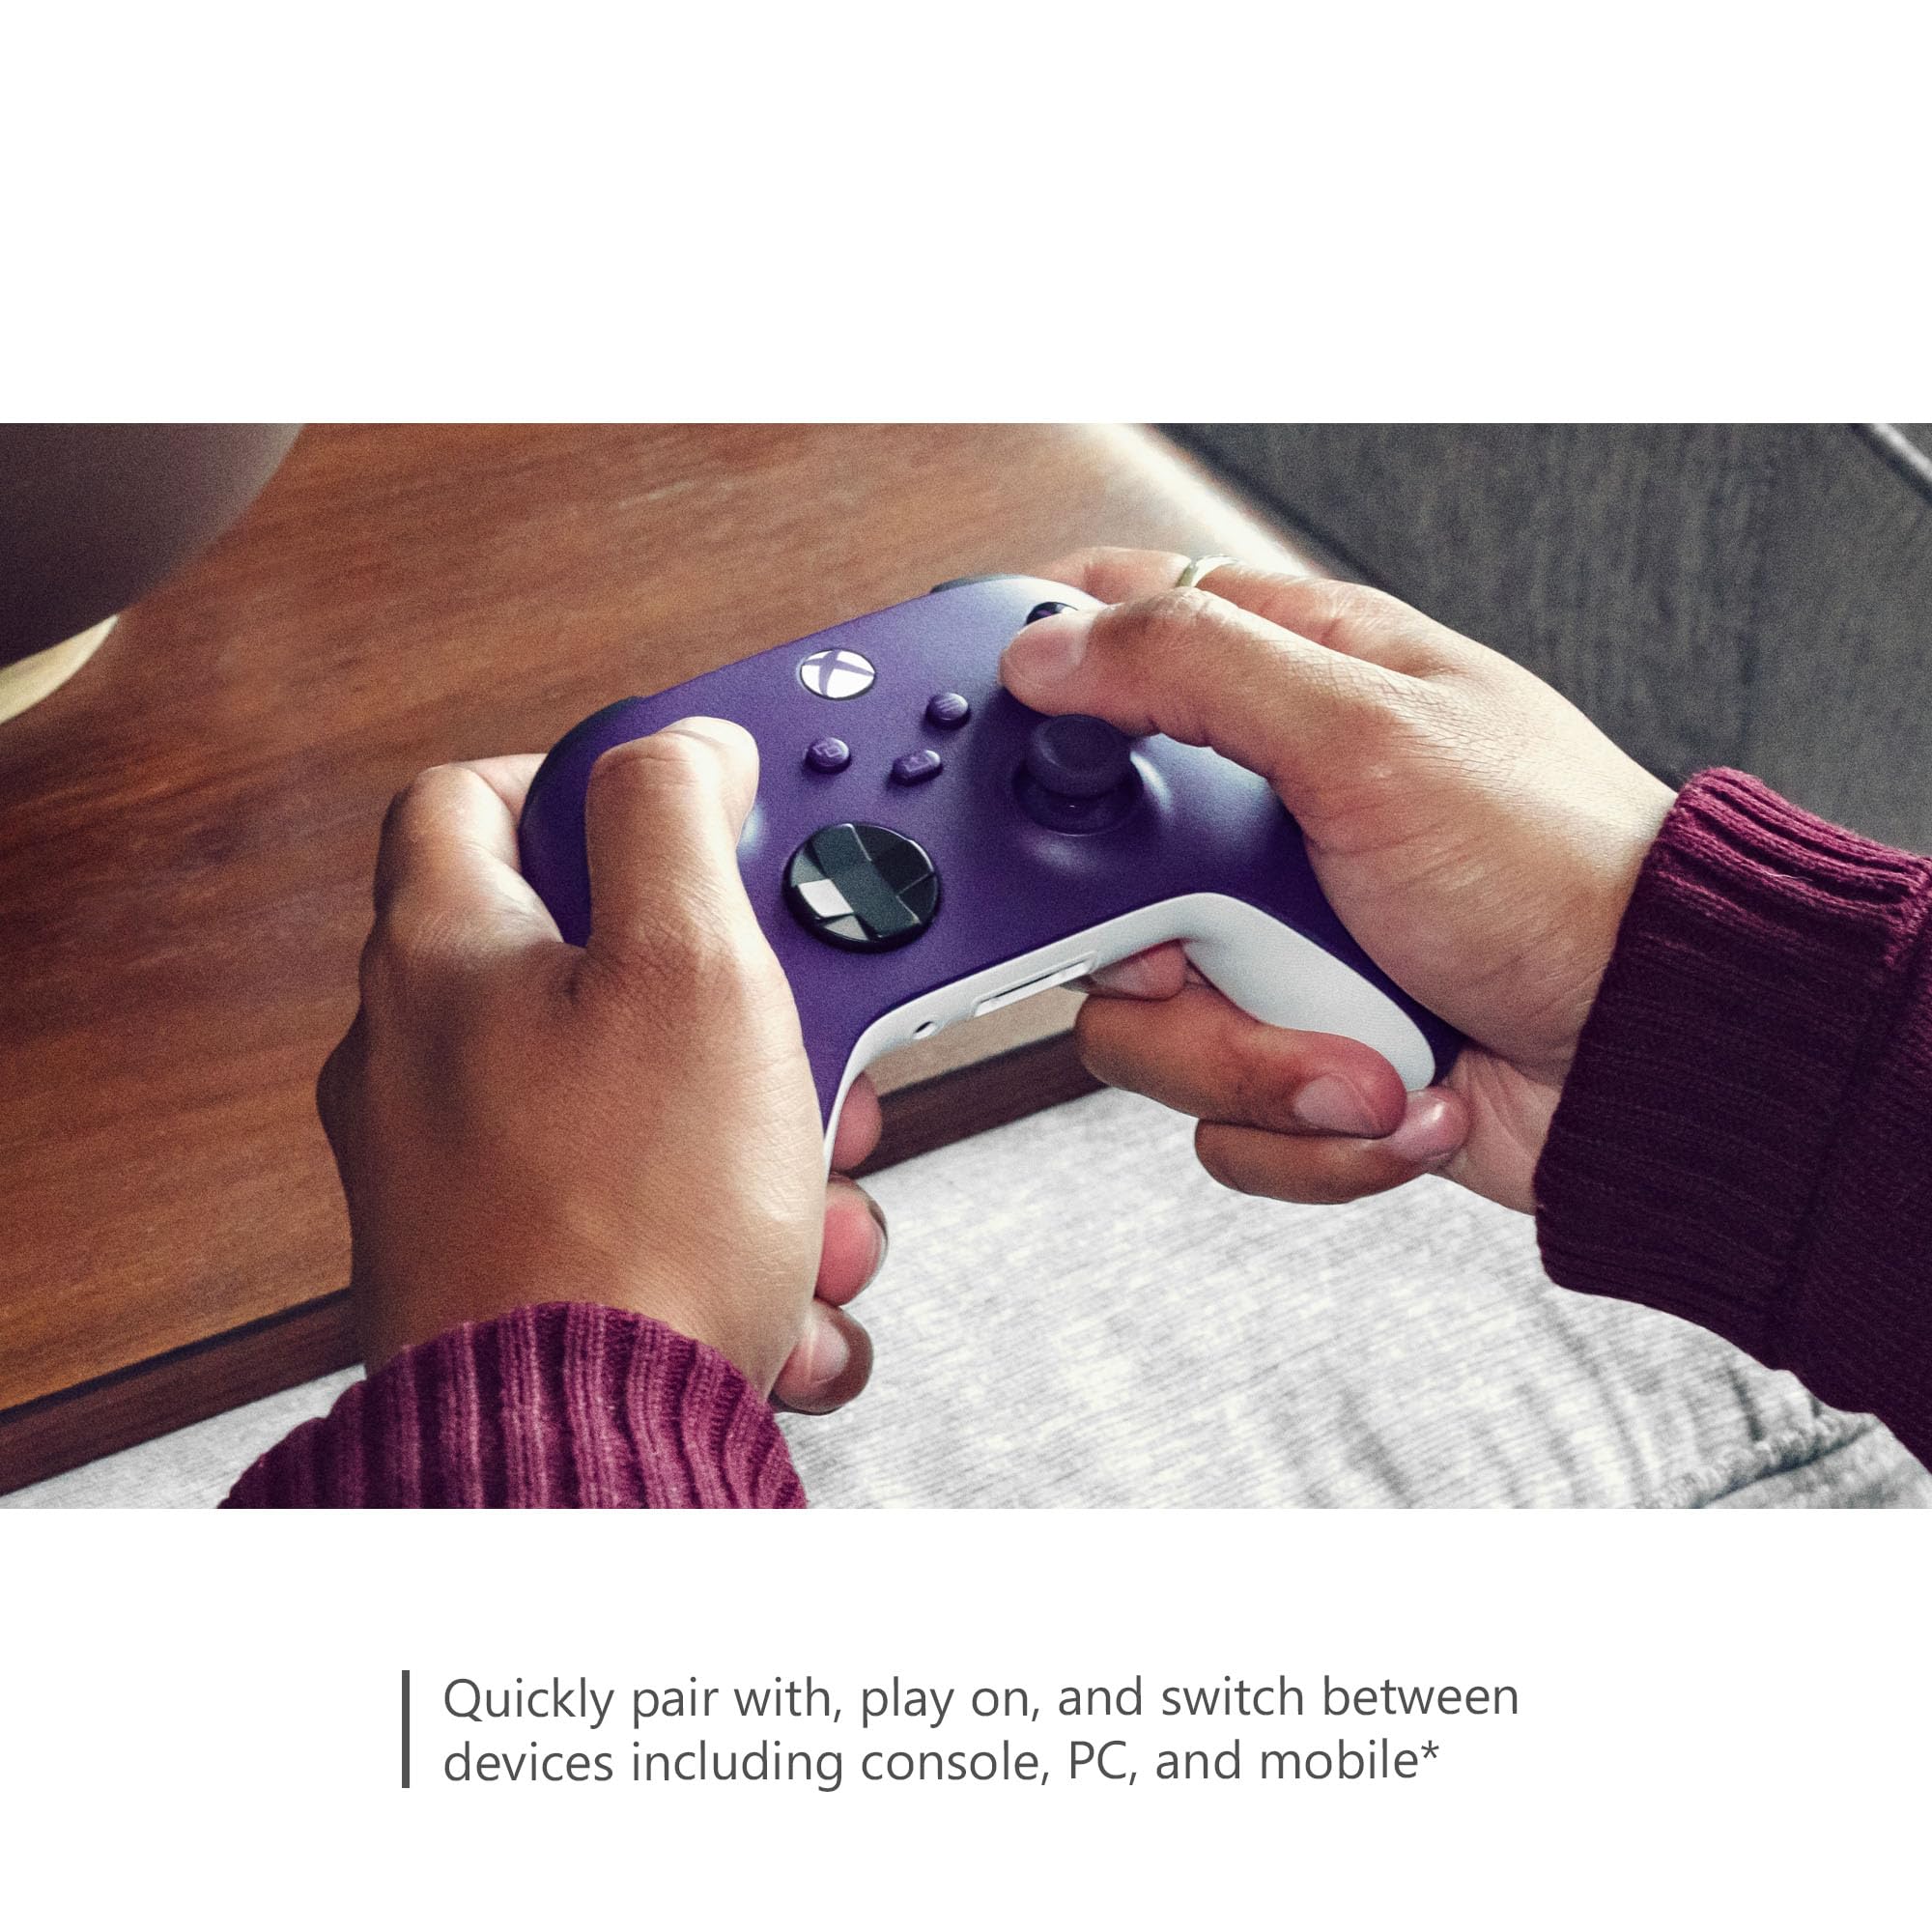 Xbox Wireless Controller – Astral Purple Series X|S, One, and Windows Devices